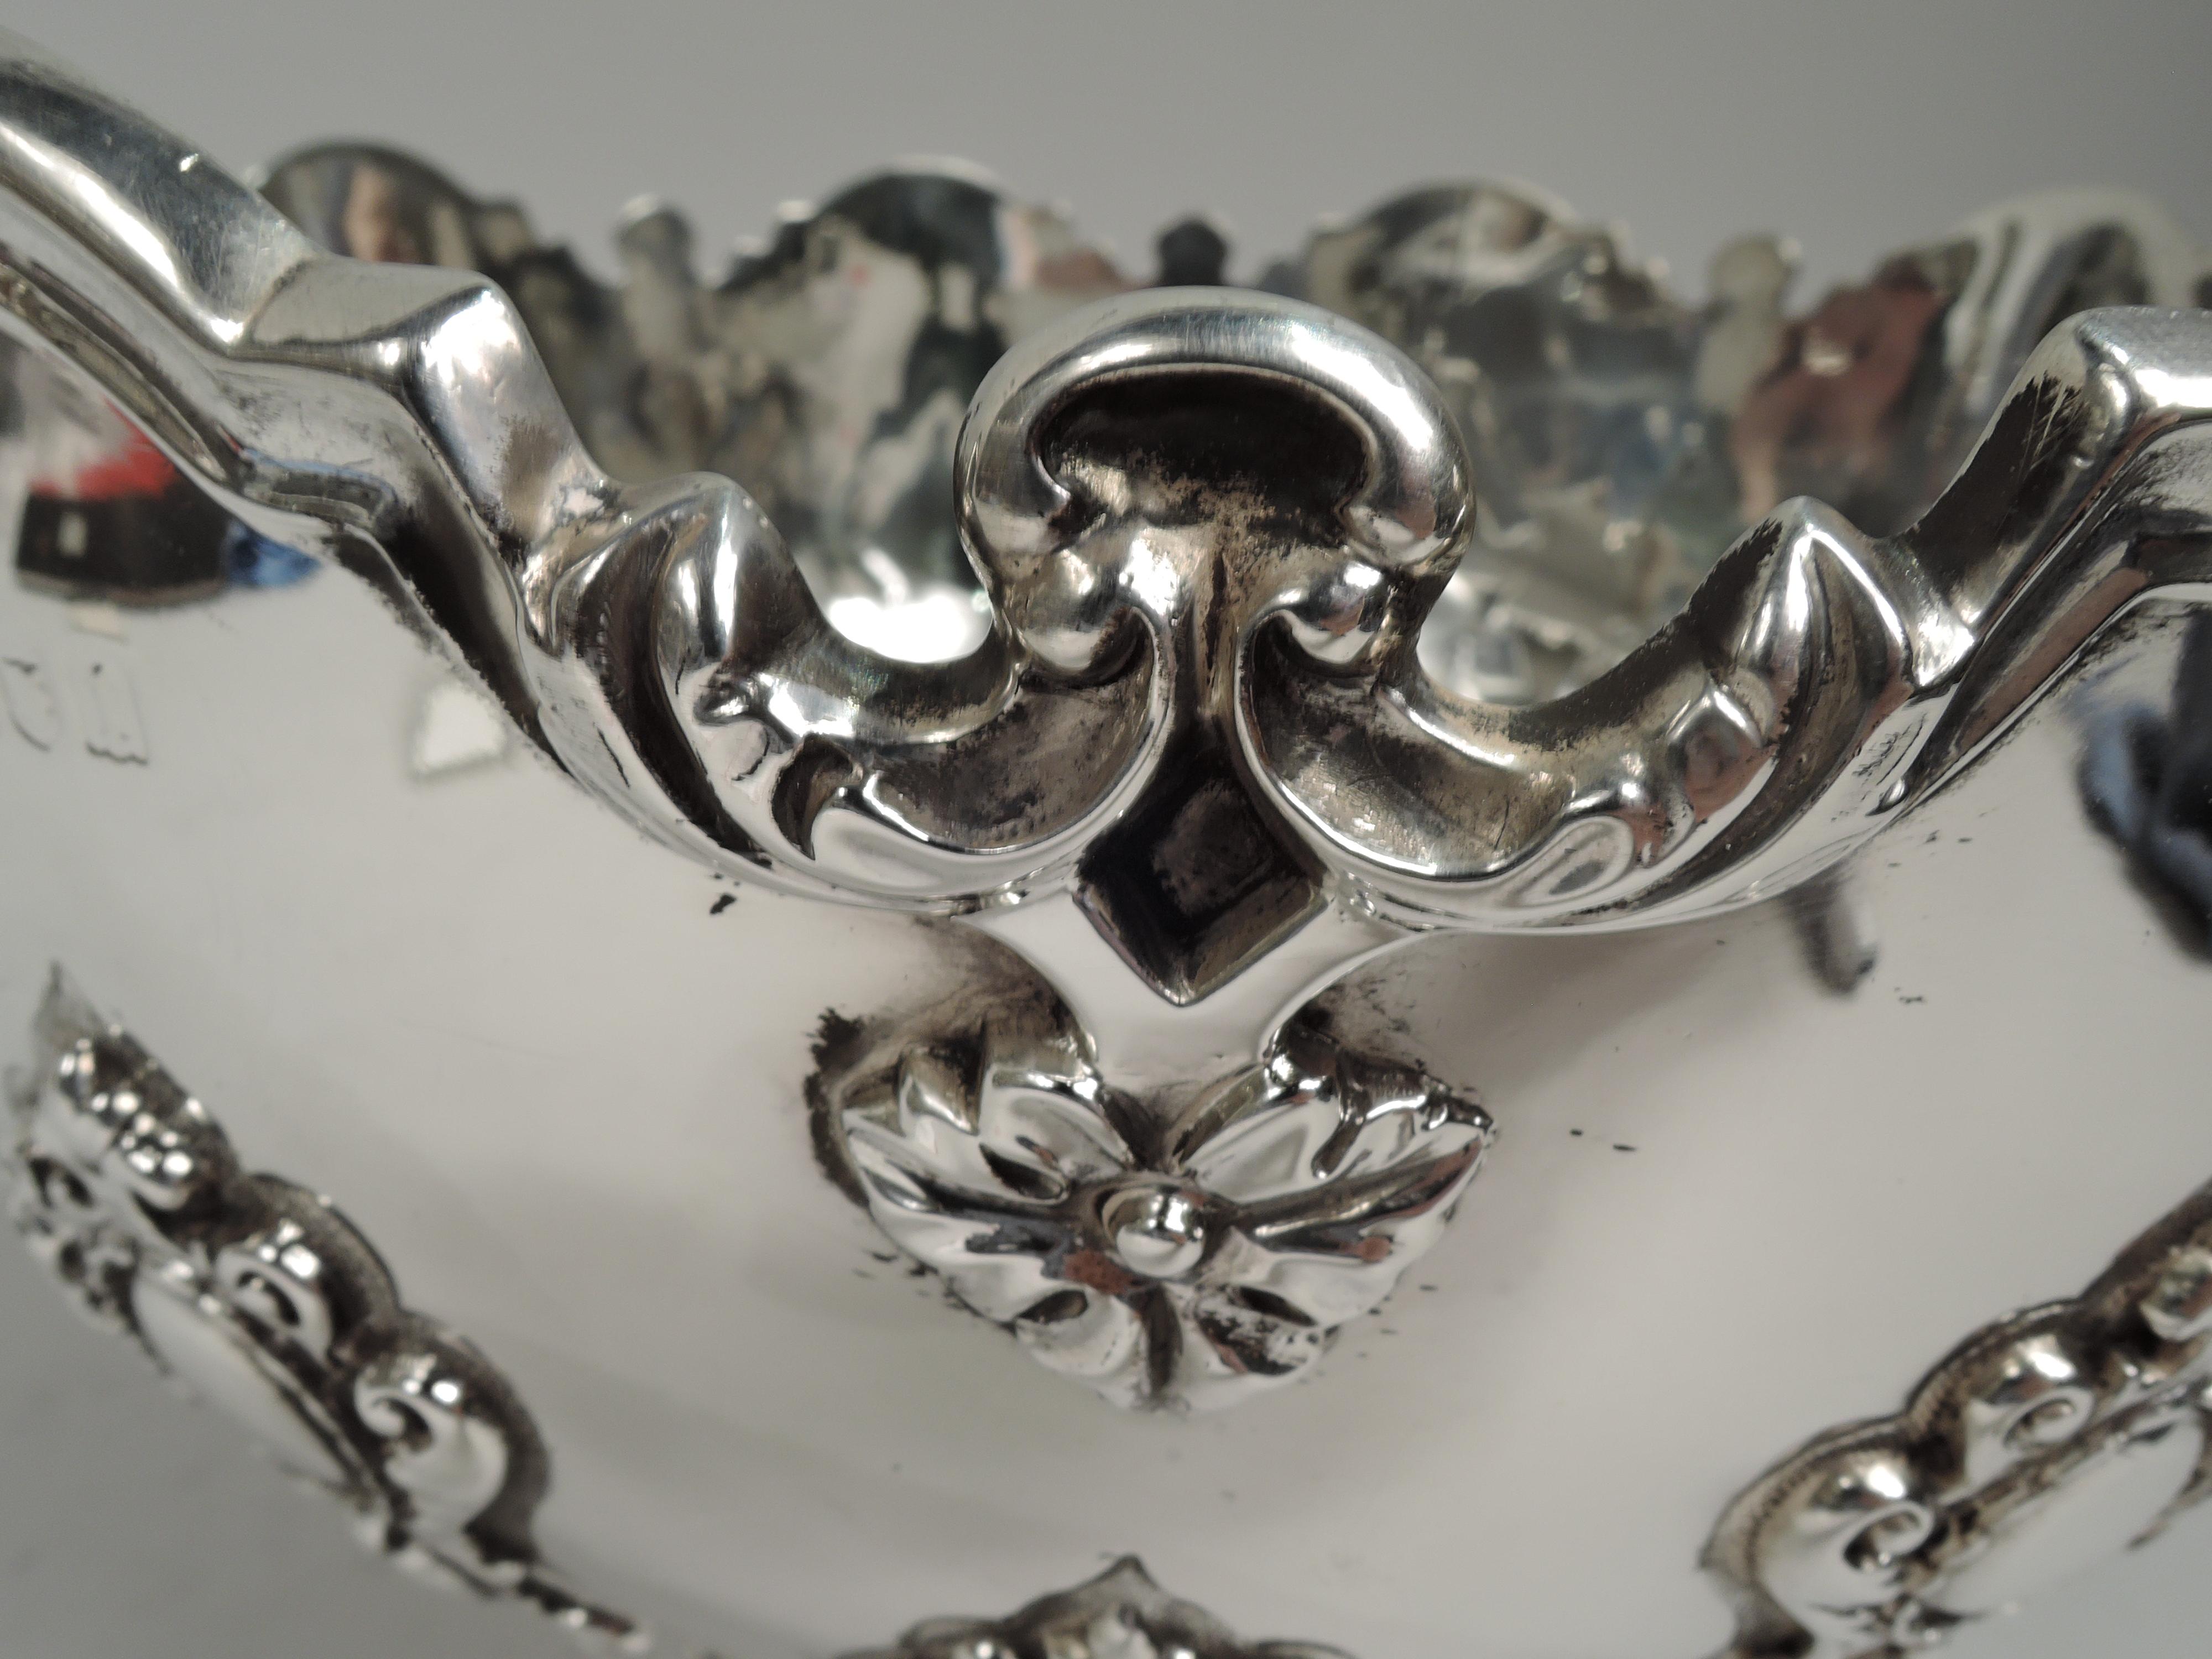 Edwardian Georgian sterling silver monteith bowl. Made by William Hutton & Sons, Ltd in London in 1906. Round and curved on raised and stepped foot. Molded curvilinear rim with interspersed with leaves and applied pendant flowers. Vertical strapwork